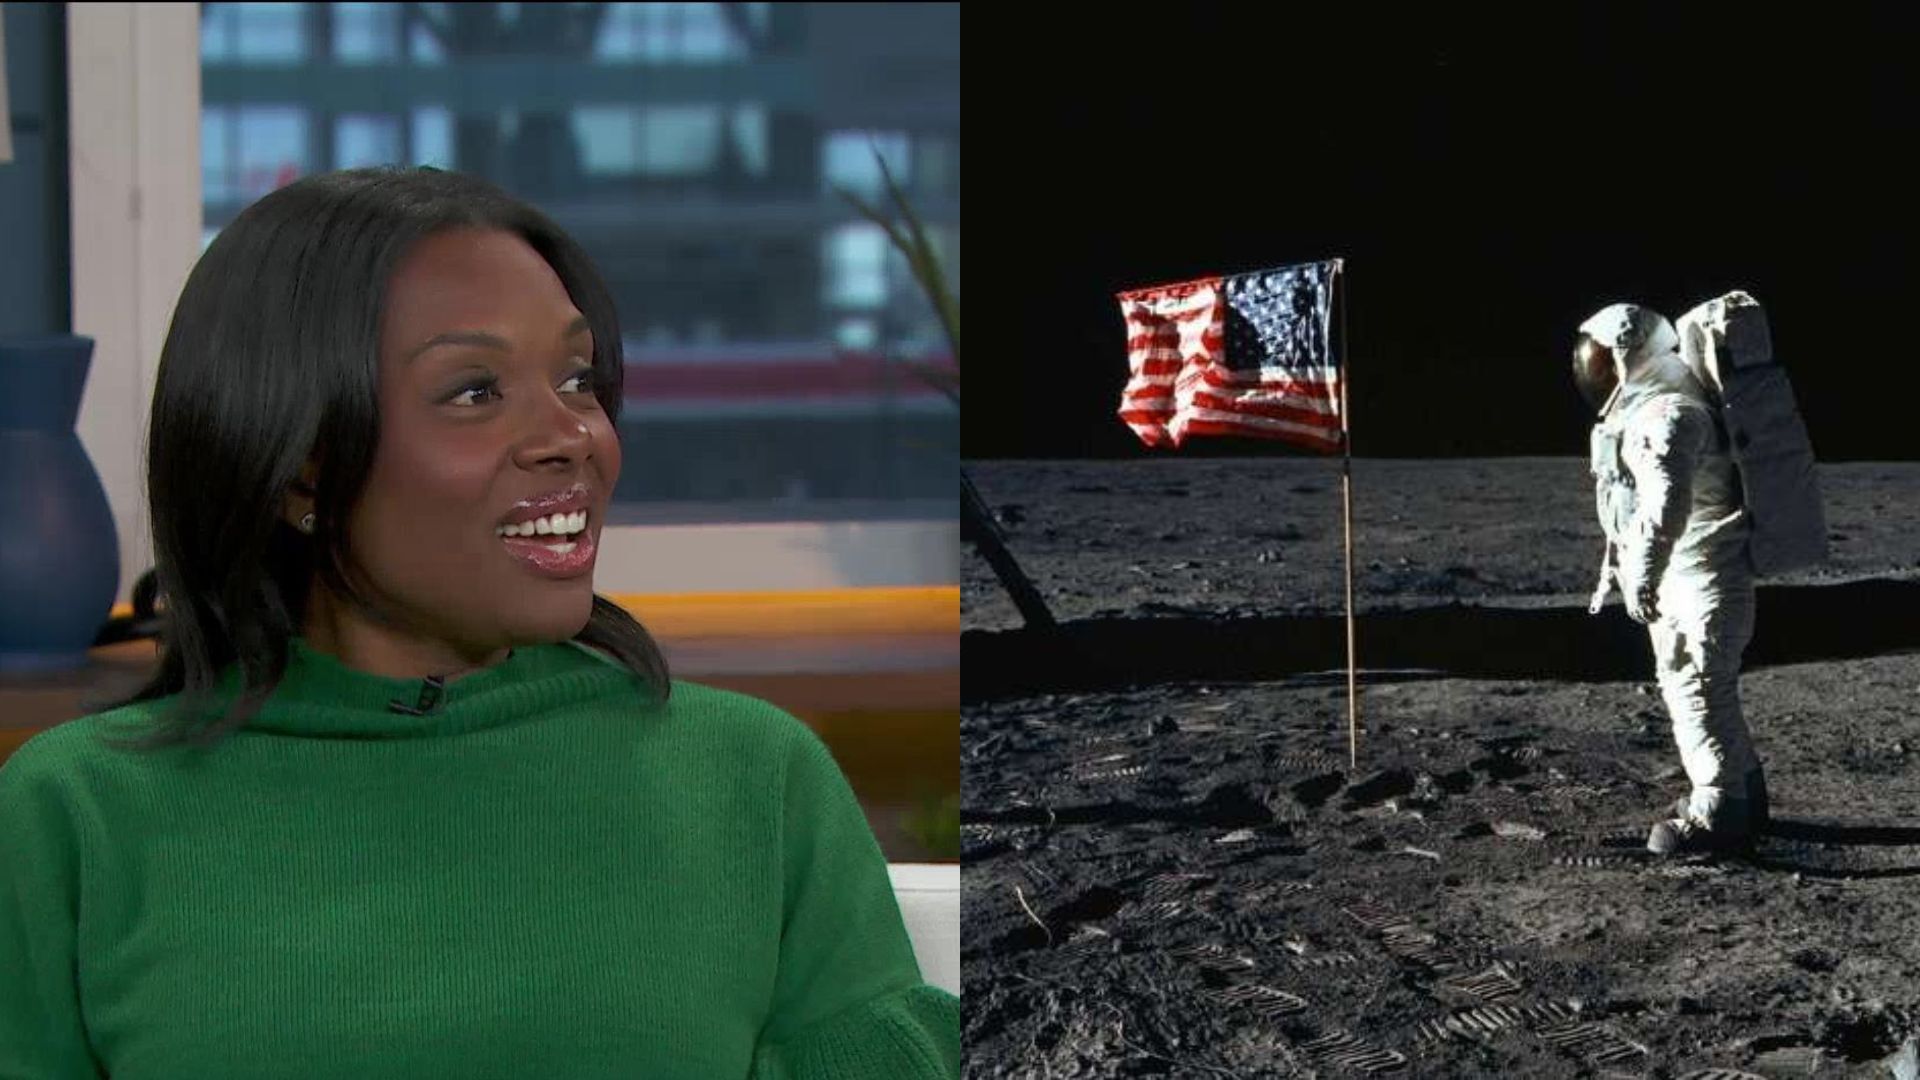 The USA just landed on the moon (and nobody even knew about it)